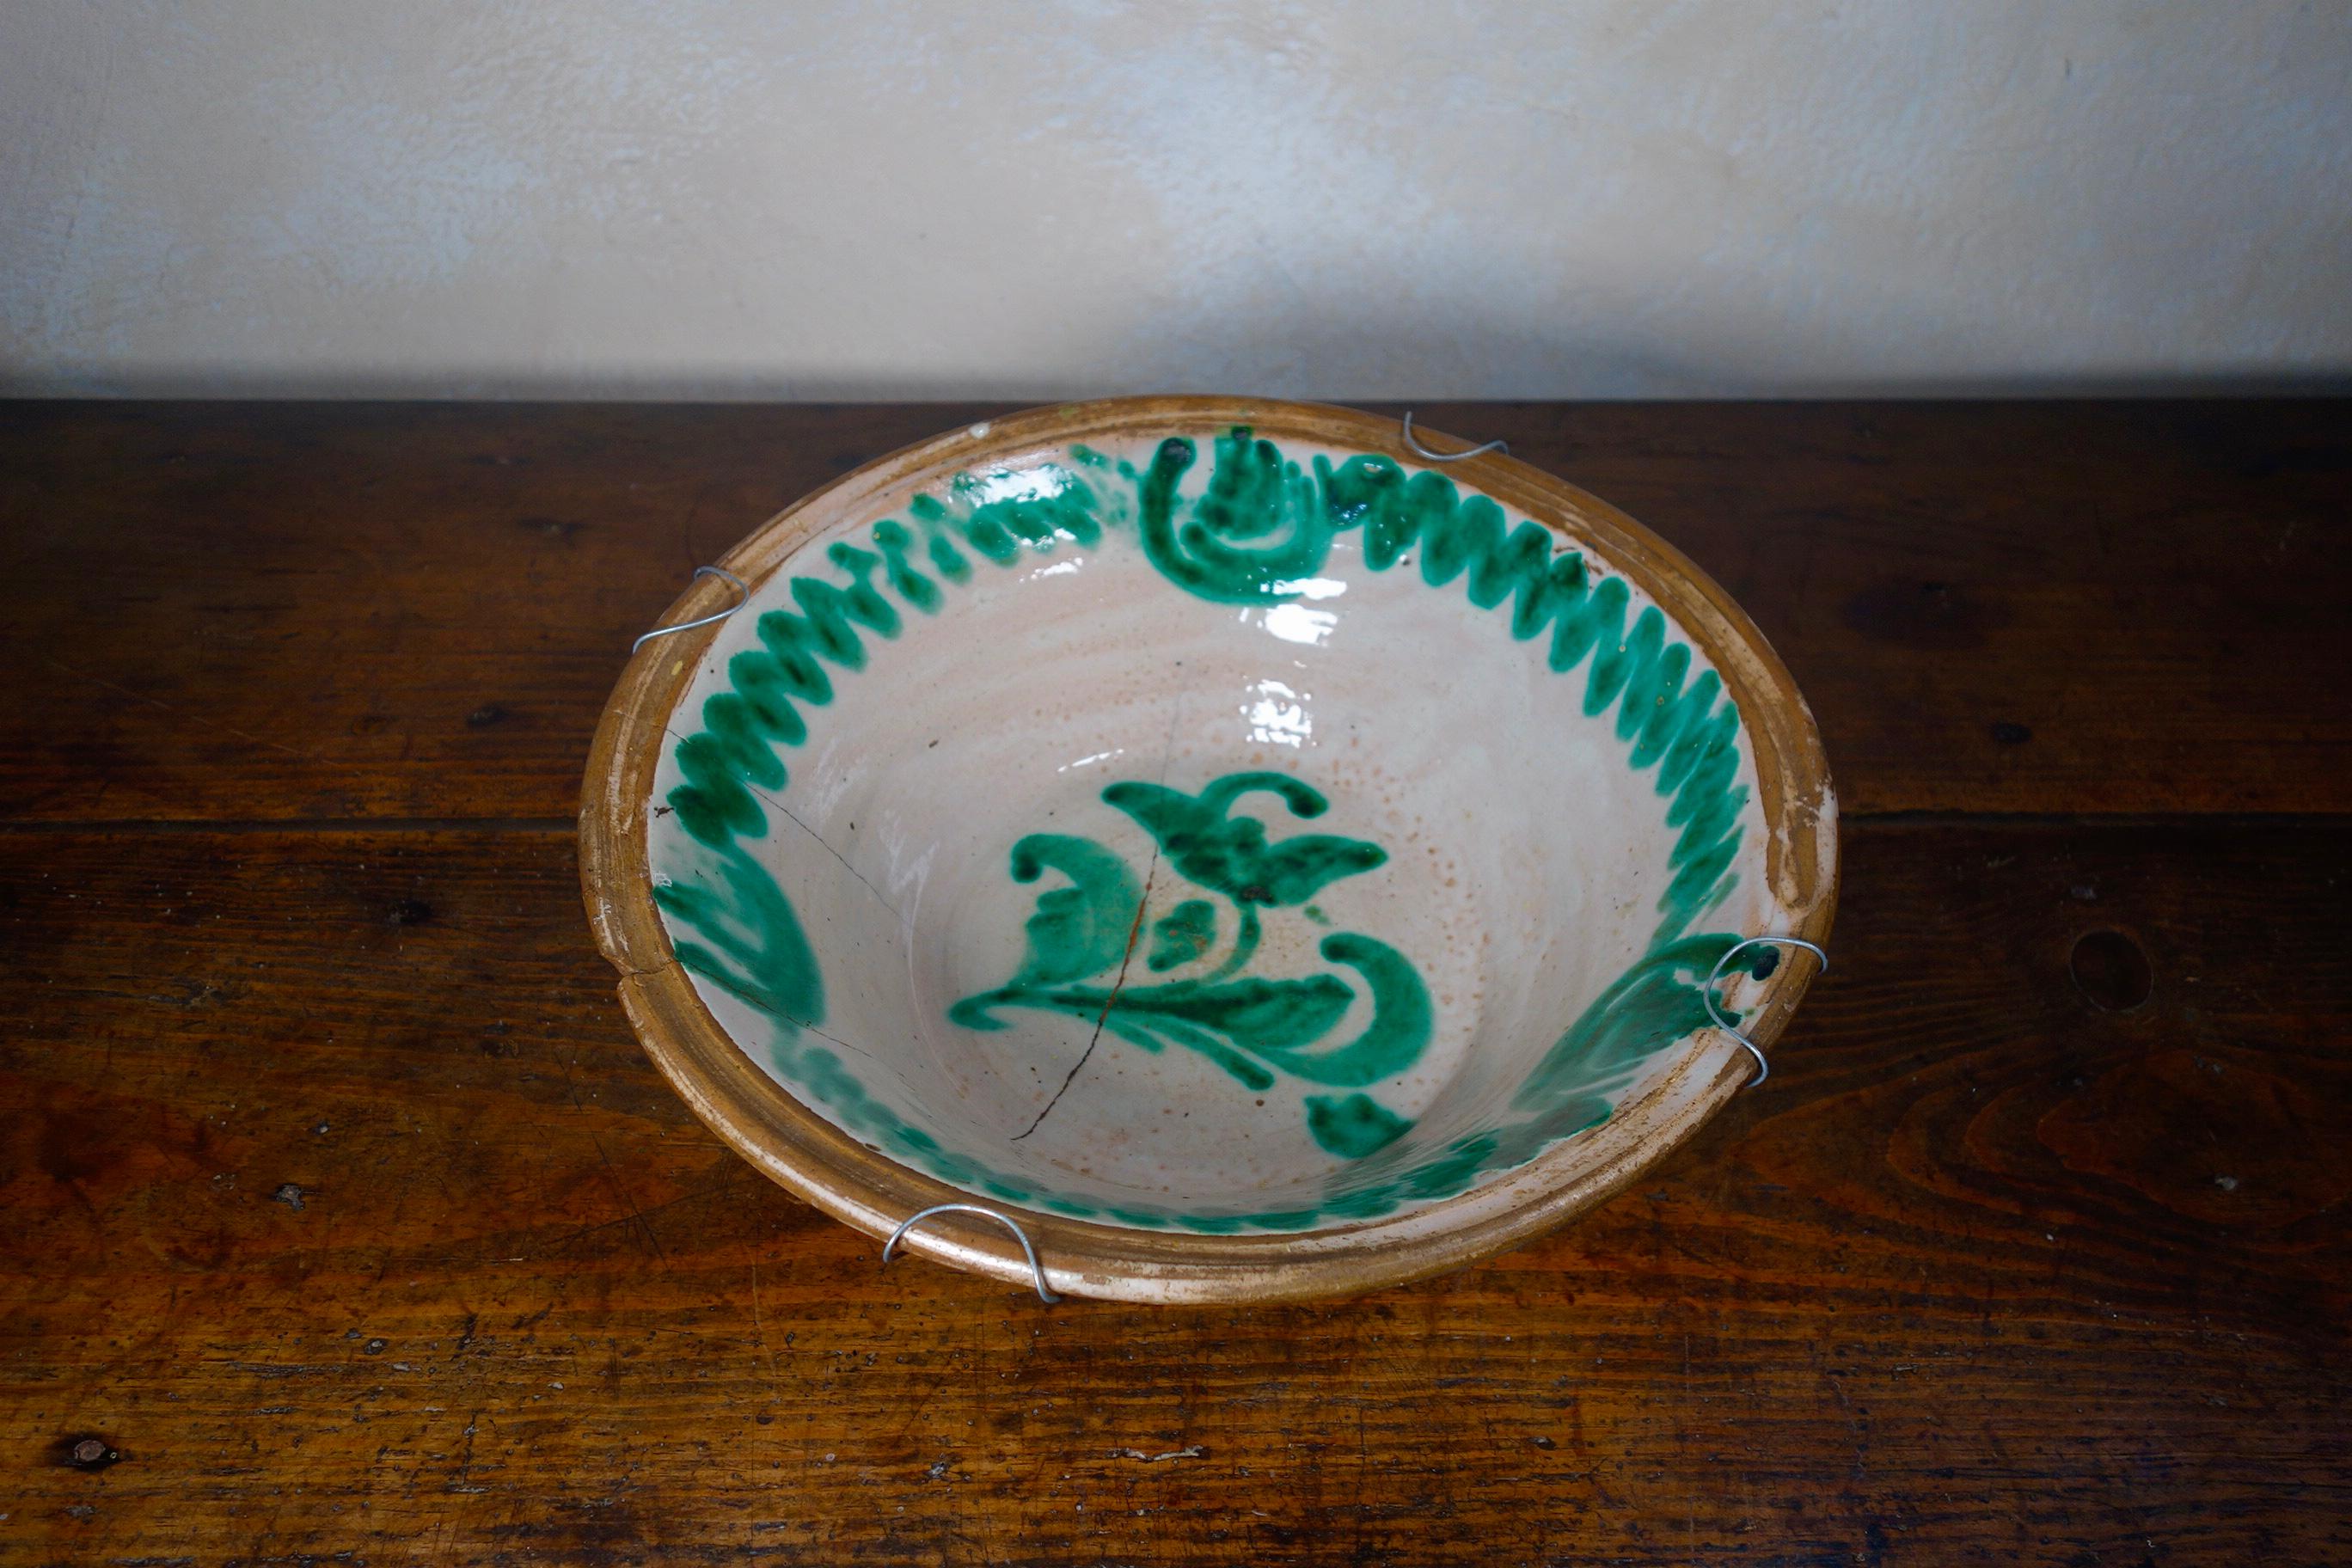 A large 1850 Spanish Lebrillo bowl earthenware originating from Granada. Featuring a lead glaze decoration in morisco green over a milk-white slip - featuring a large flower motif to the base of the bowl surrounded by smaller flowers close to the